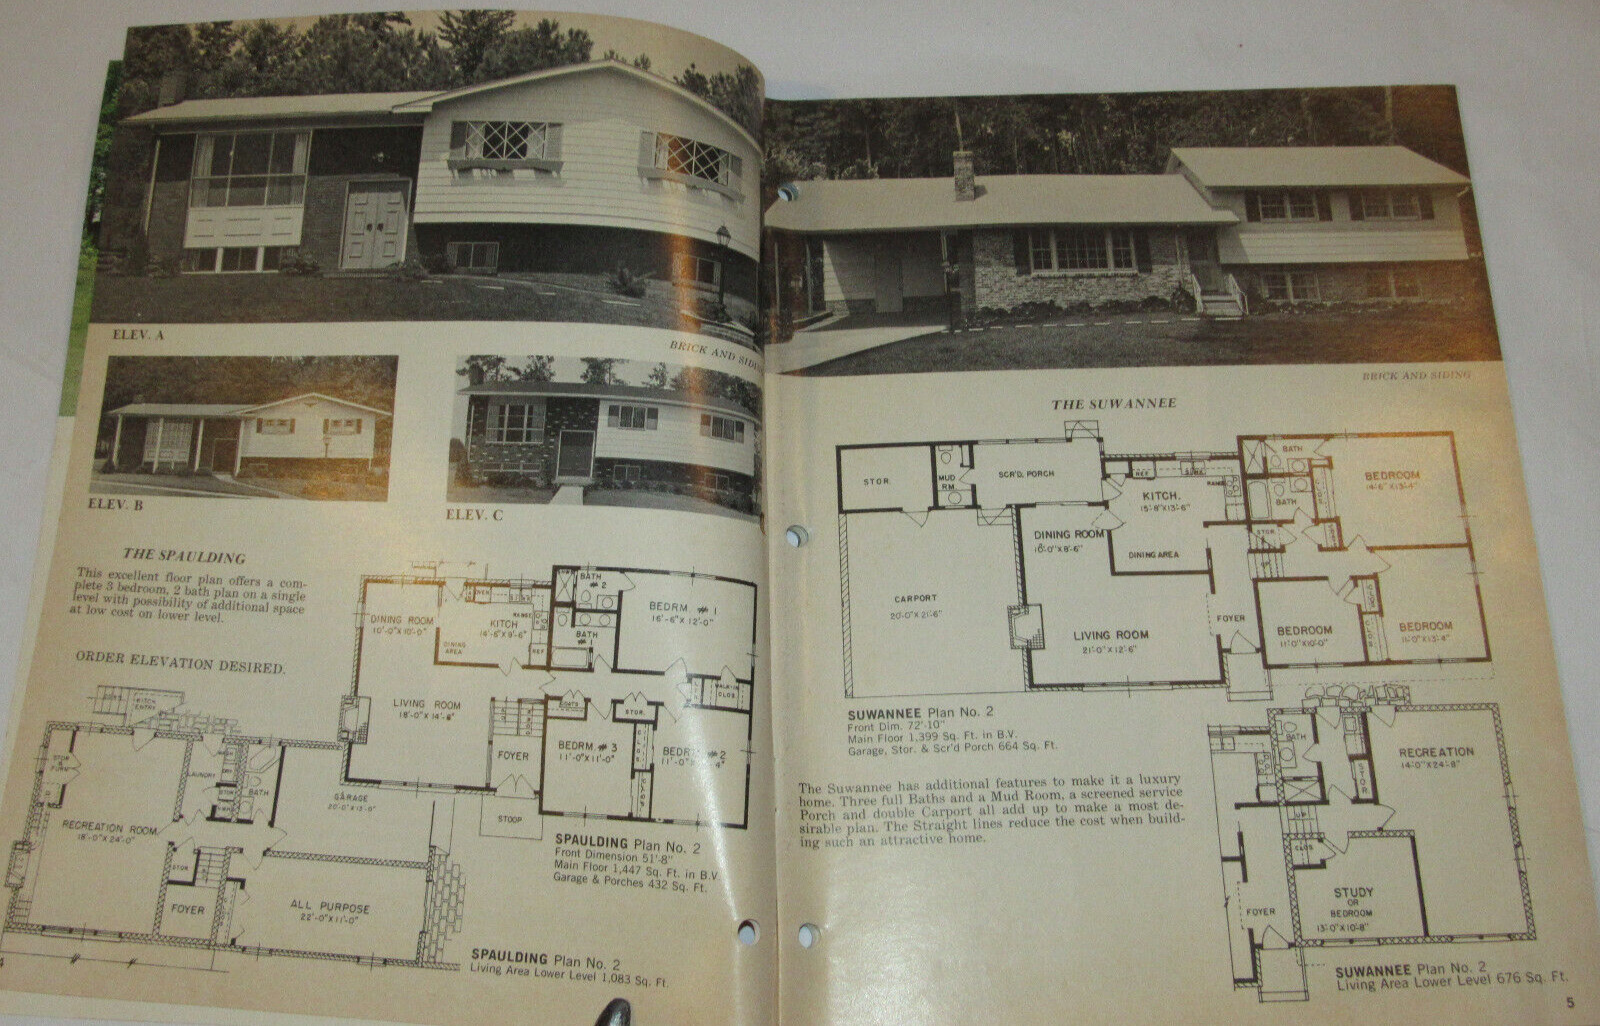 VINTAGE 1970s 37 MULTI-LEVEL HOMES ΤΟ 2846 SQ FT CATALOG OF HOUSE PLANS! LAYOUTS